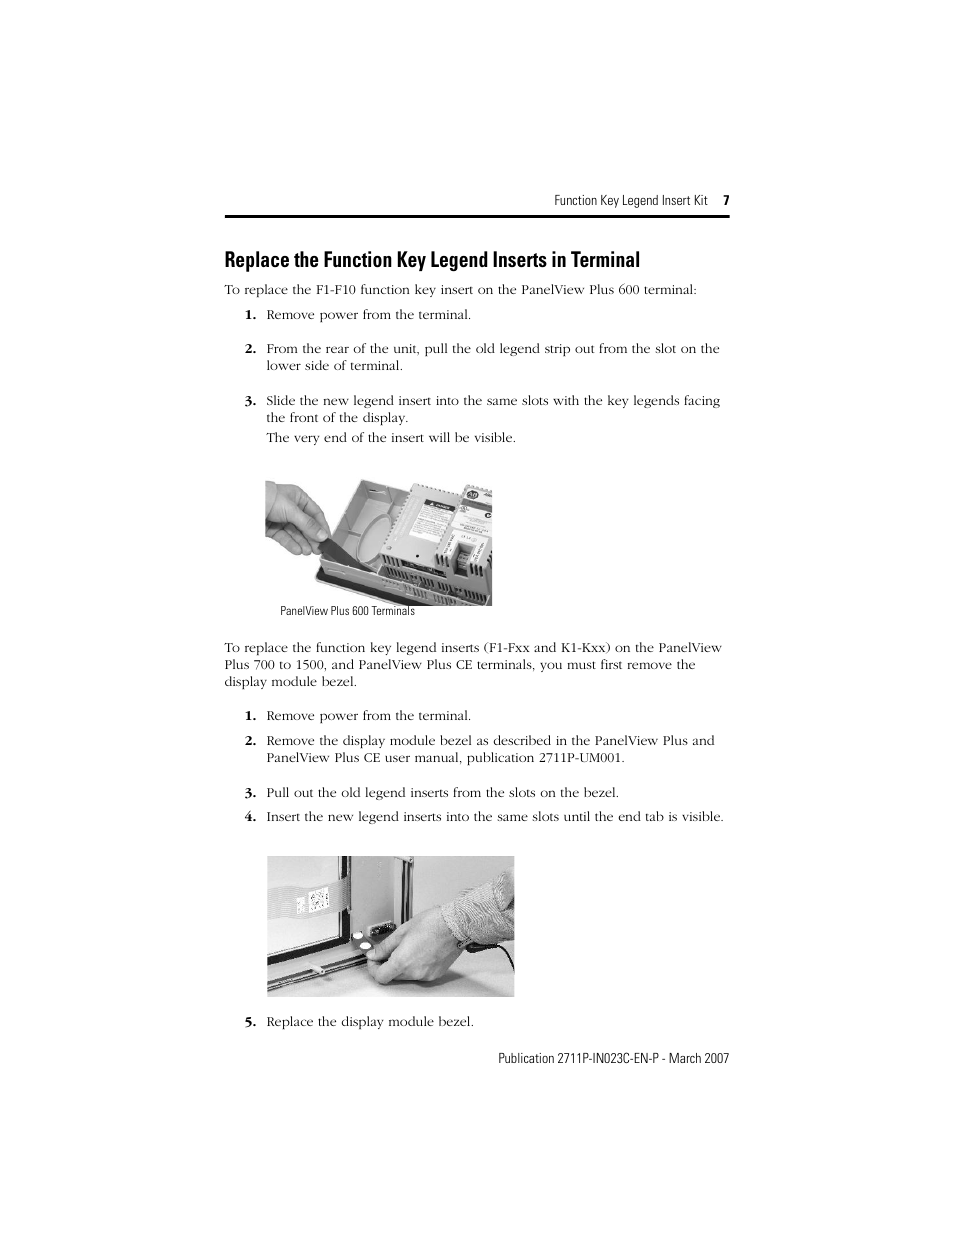 Rockwell Automation 2711P-RFKx Function Key Legend Kit User Manual | Page 7 / 8